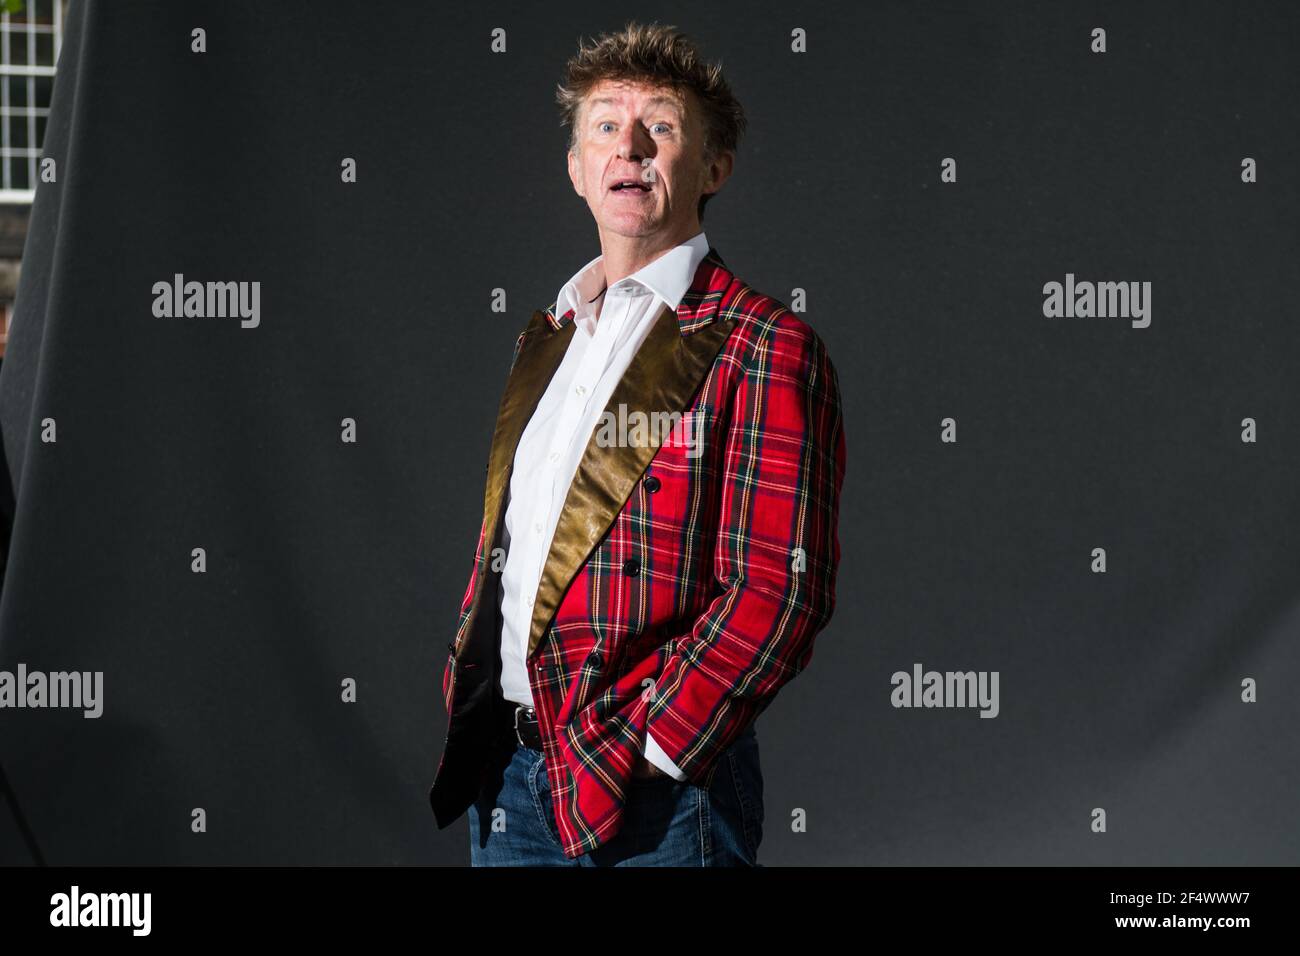 Edimburgh, Scotland. 19 August, 2018. Scottish poet and stand-up comedian Elvis Mcgonagal attends a photocall during the Edinburgh International Book Stock Photo